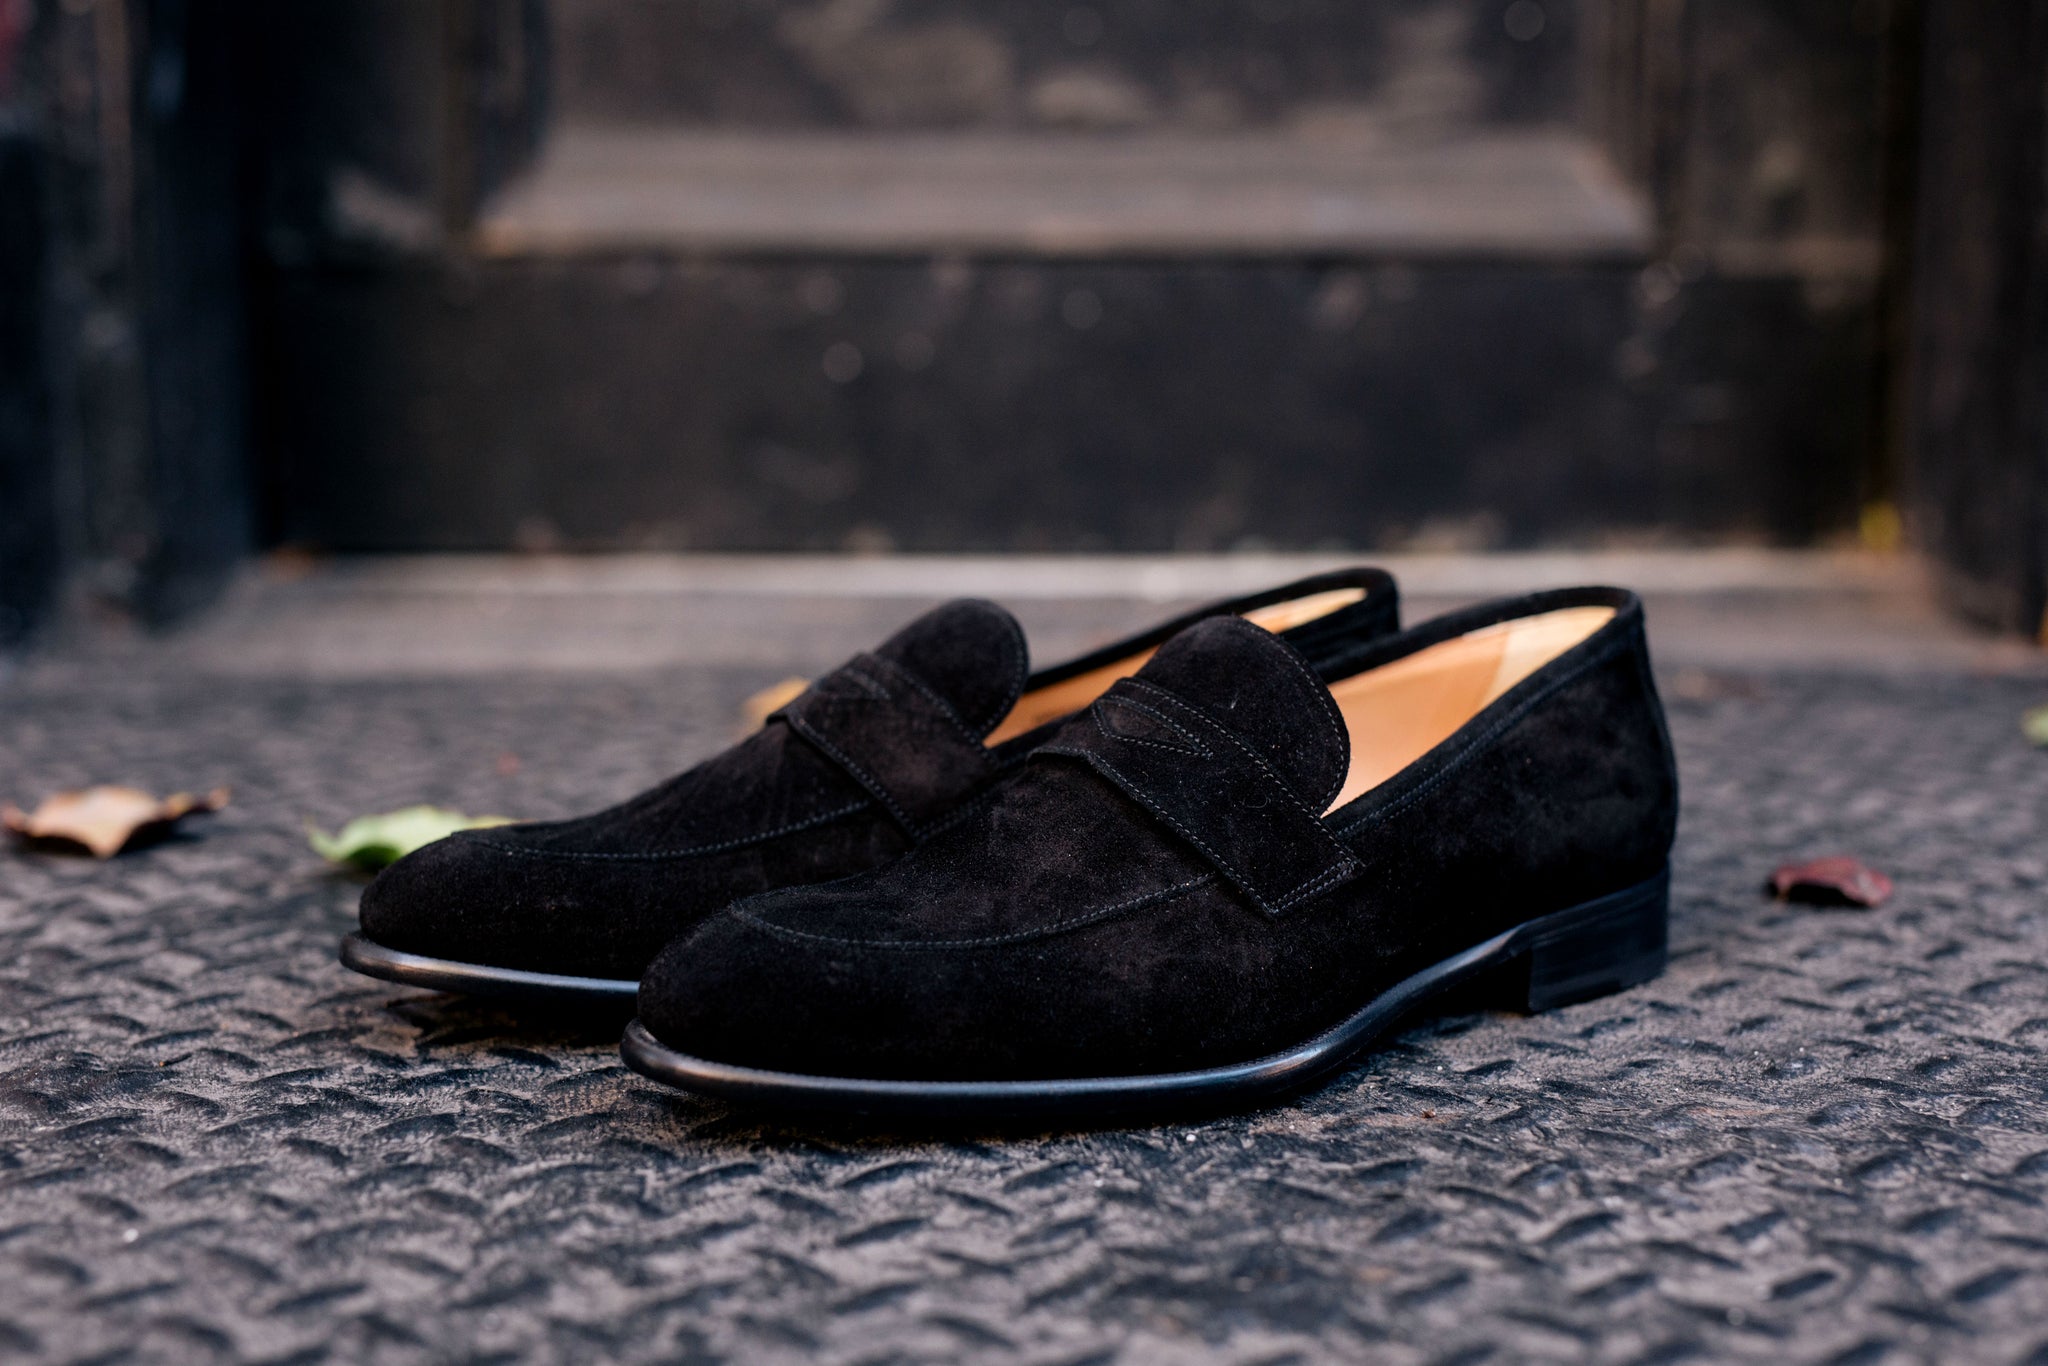 The Louis Penny Loafer - Nero Suede